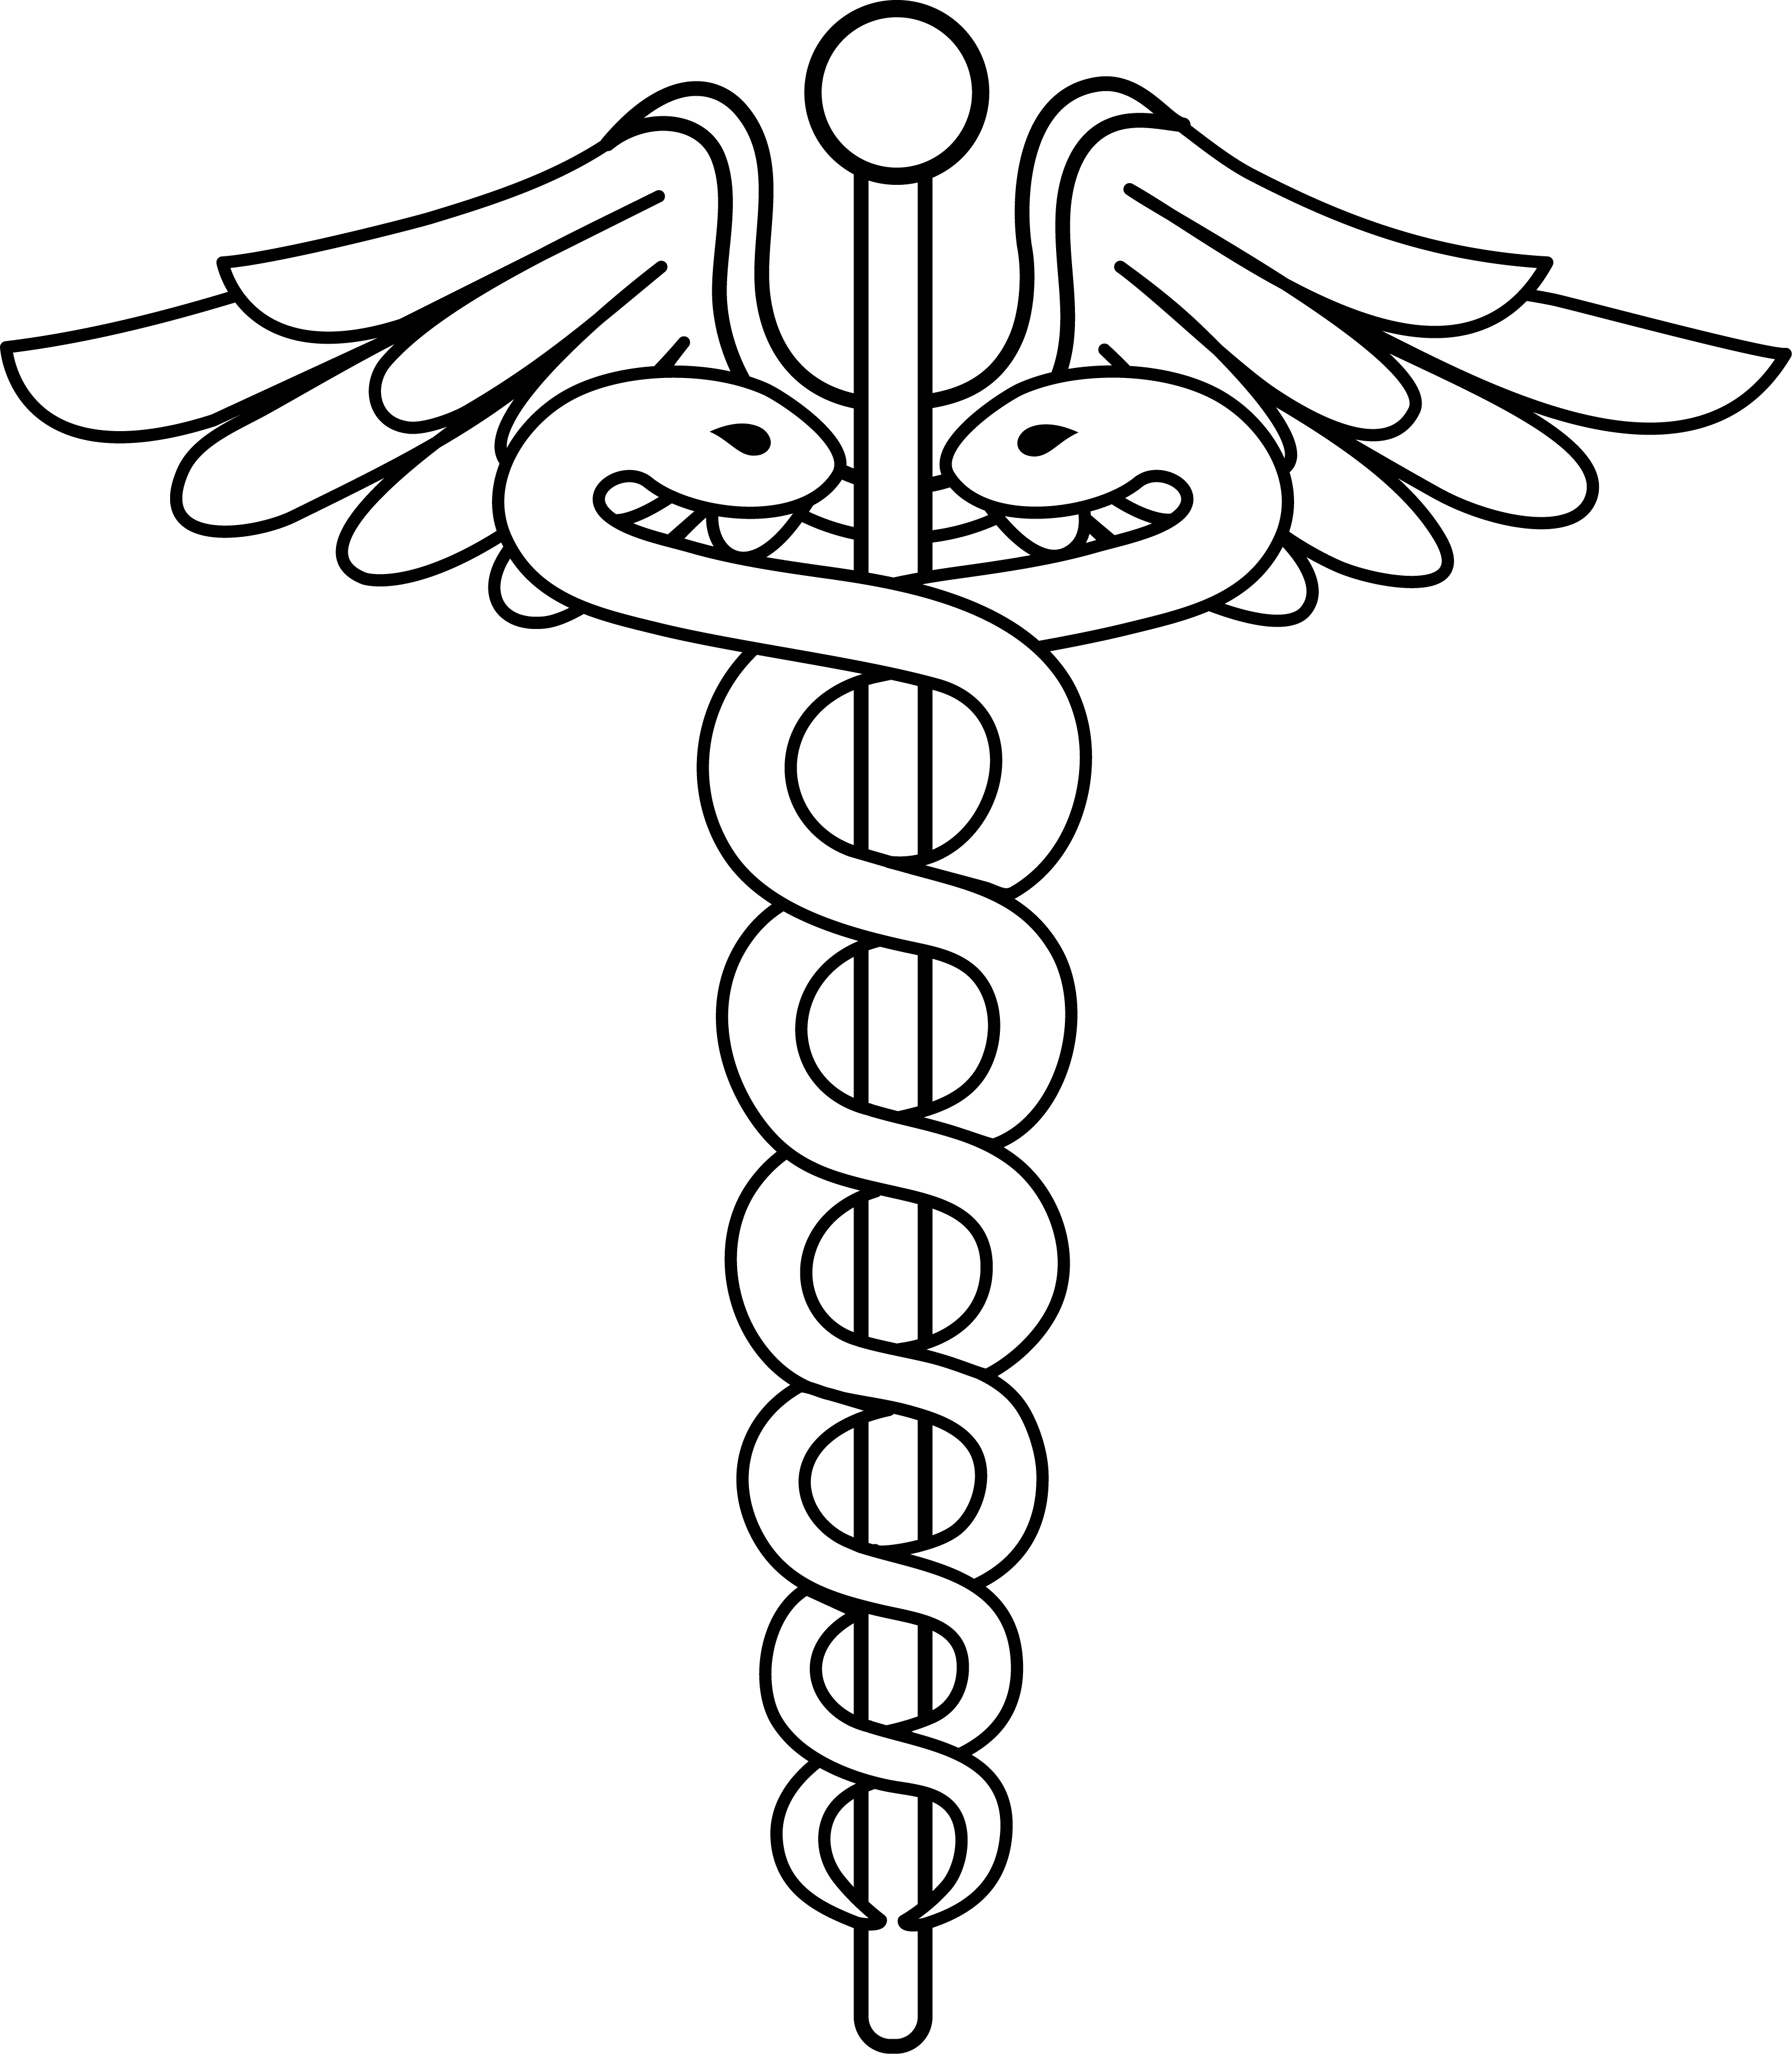 Free Medical Symbol Black And White Download Free Medical Symbol Black And White Png Images Free Cliparts On Clipart Library